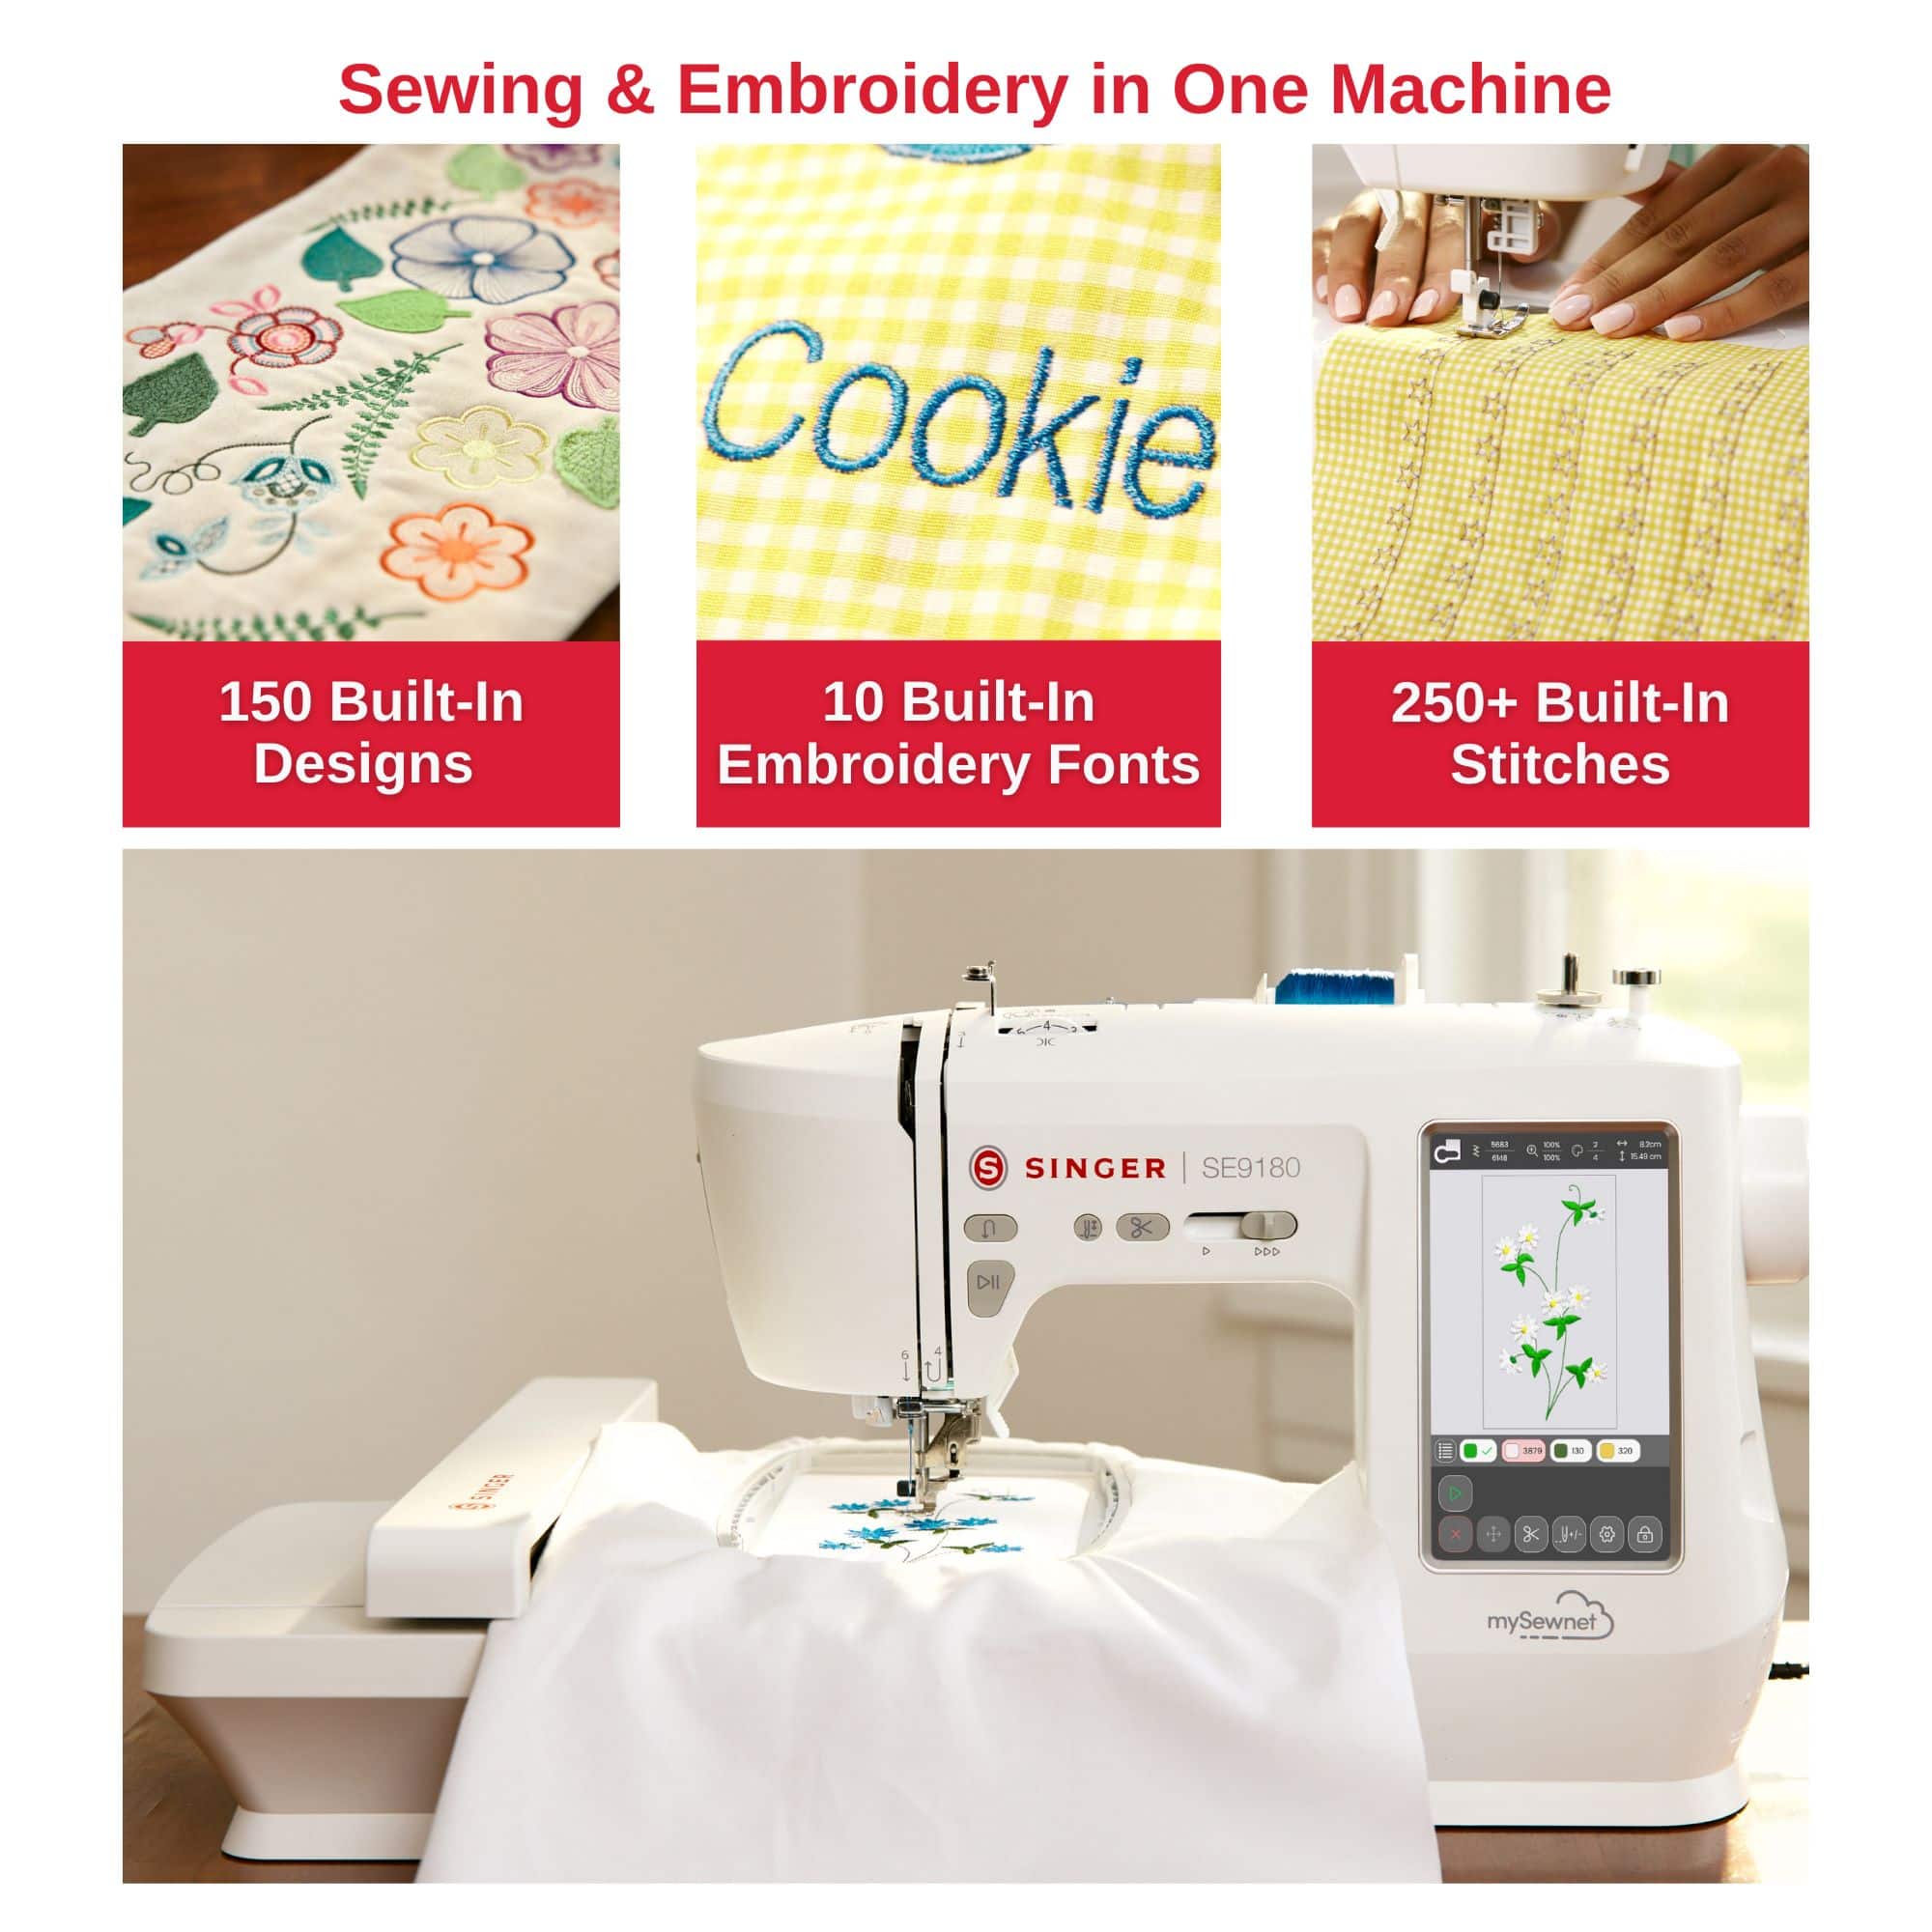 Embroidery & Darning Foot Singer 320 Model Sewing Machine – The